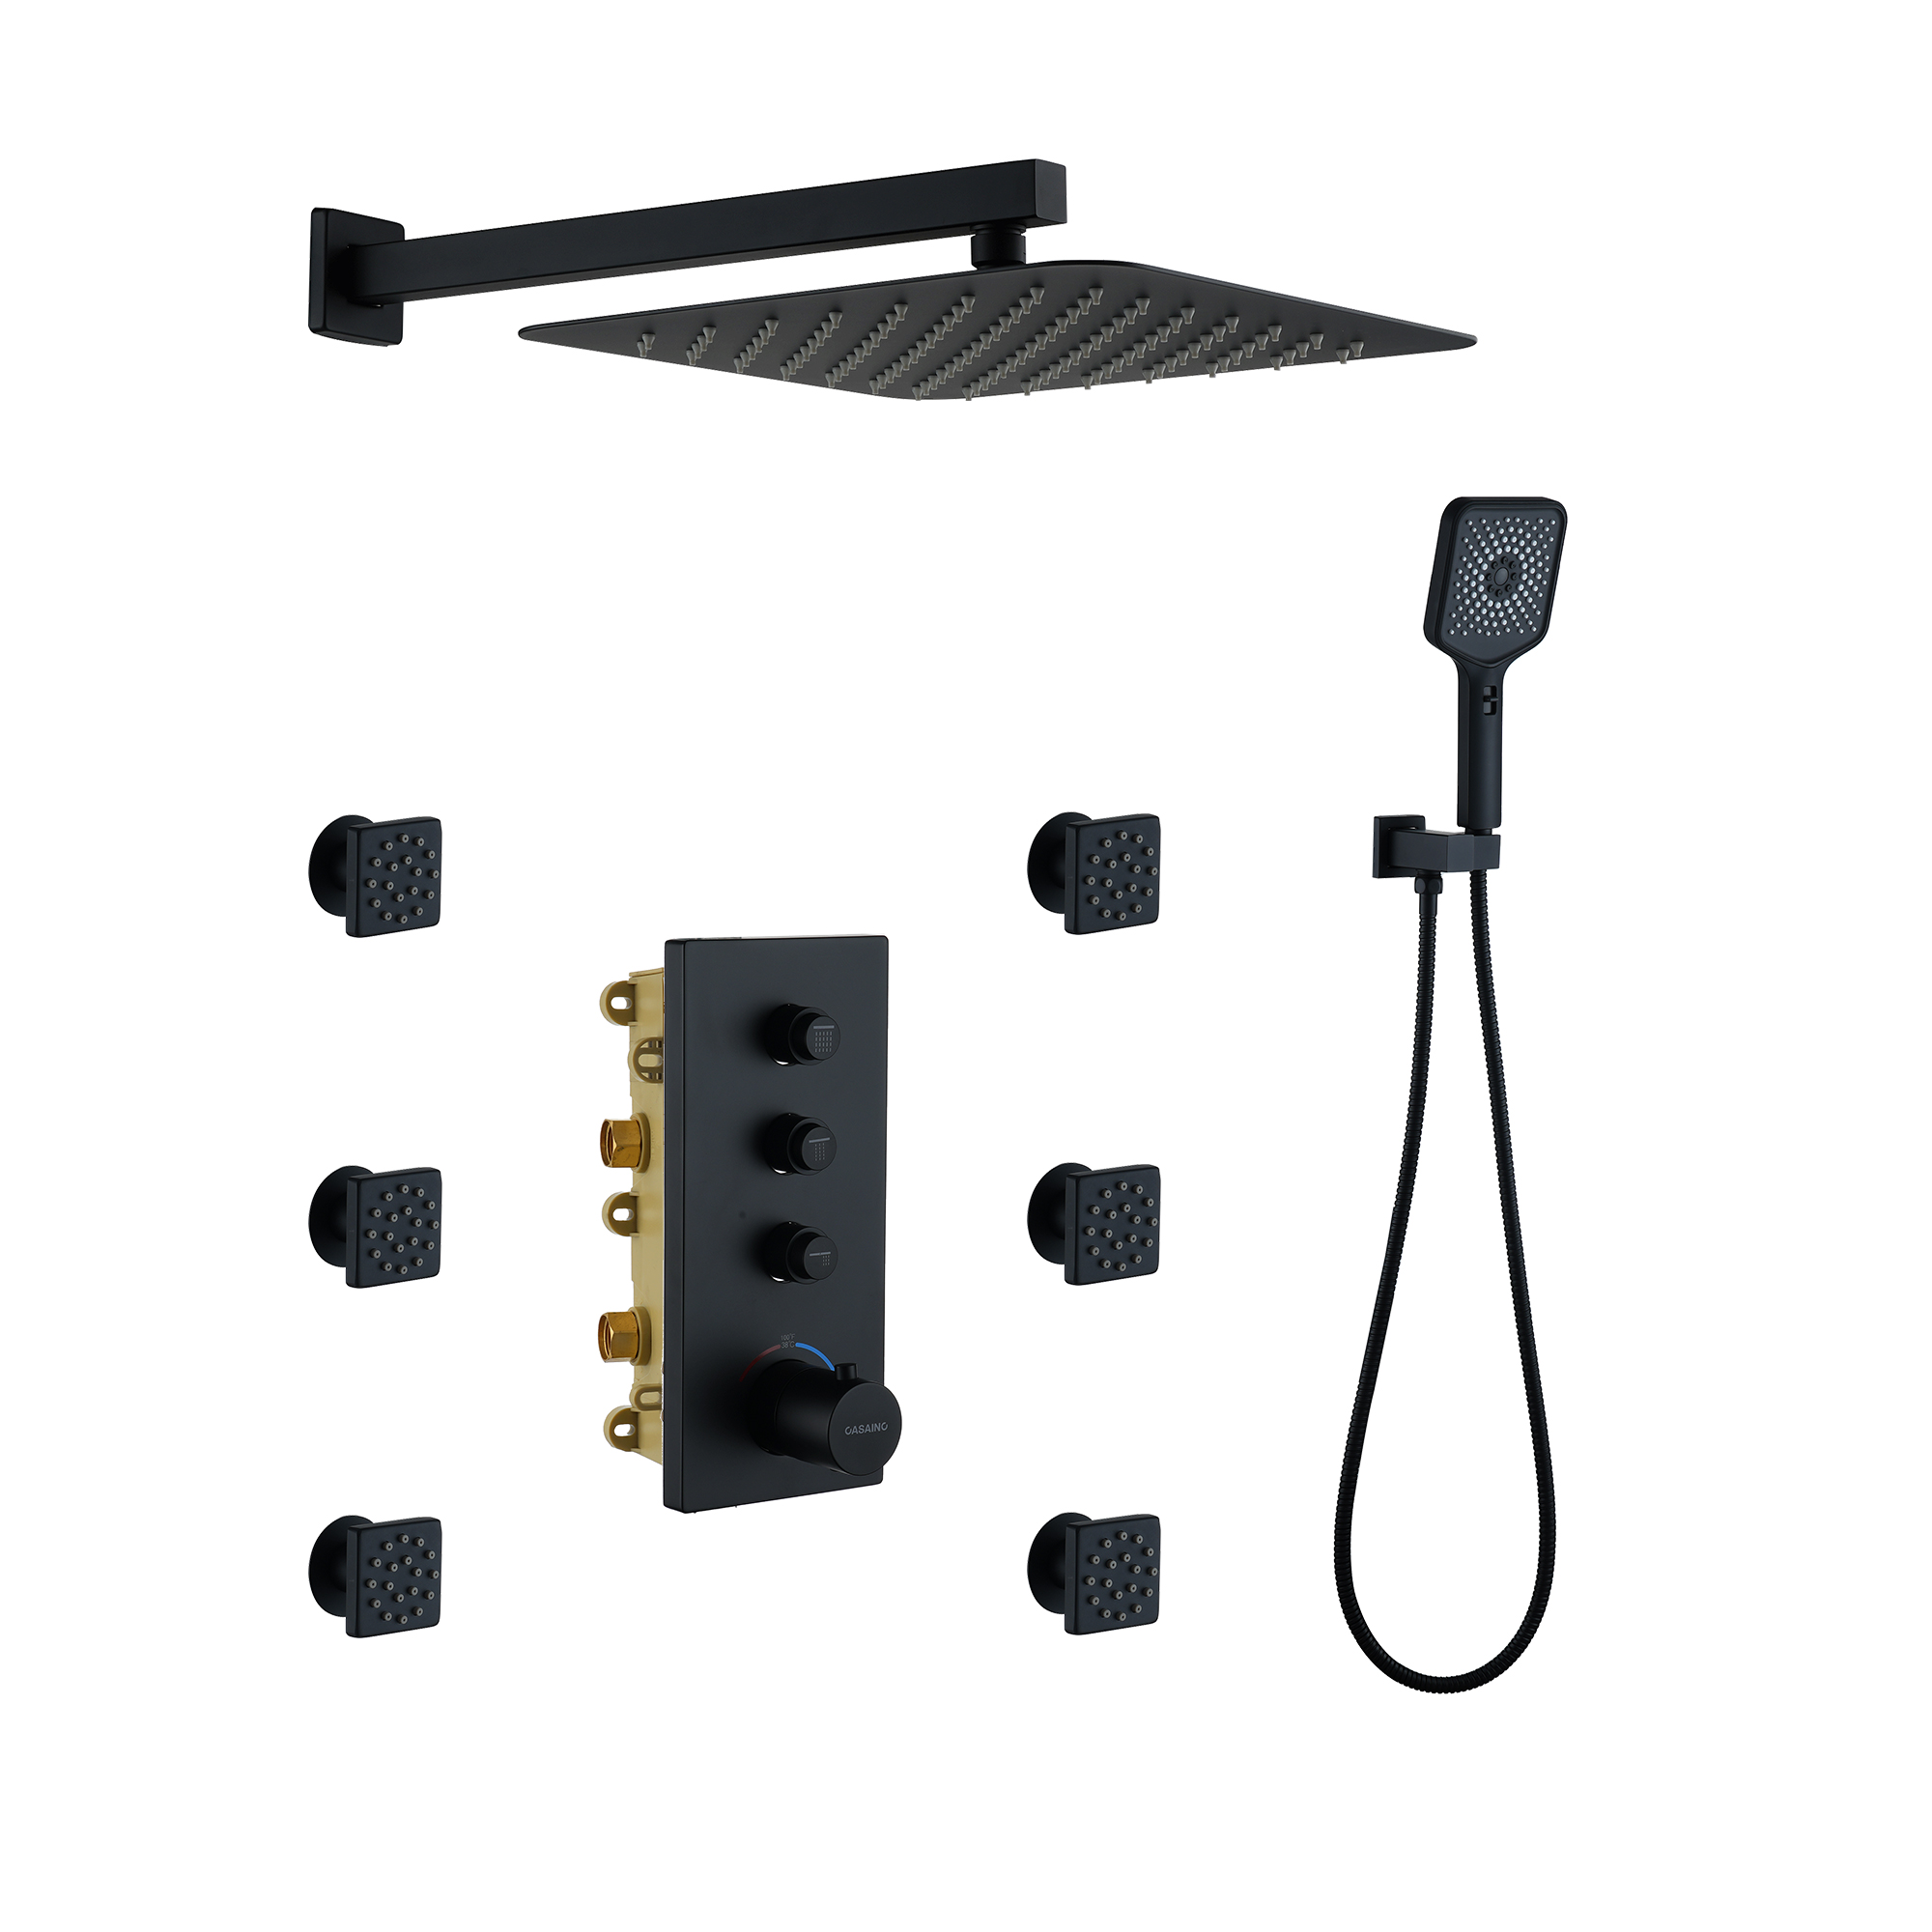 12 Inch Wall Mount Thermostatic Shower System with Body Sprays in Matte Black Finish, Rain Shower Head, water temperature control rain shower